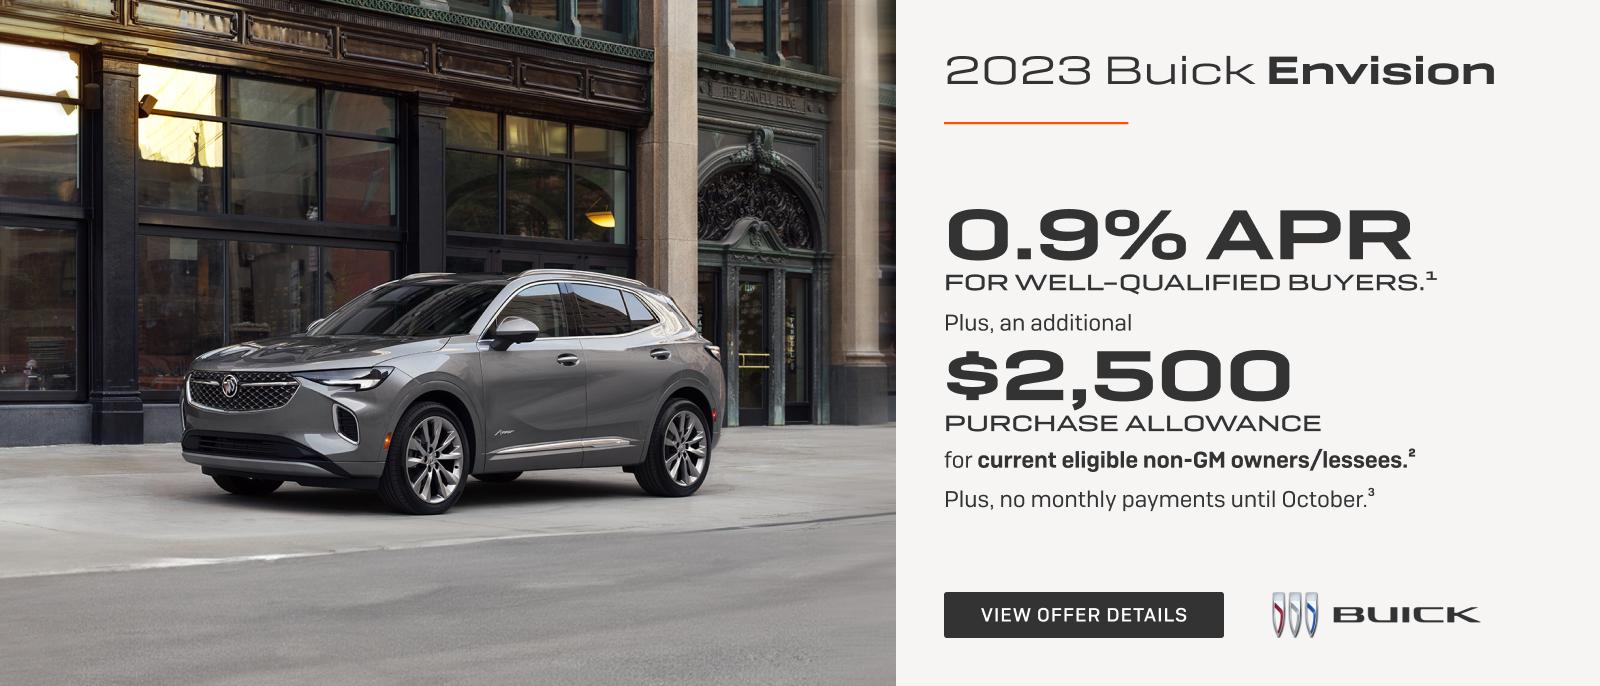 0.9% APR 
FOR WELL-QUALIFIED BUYERS.1

Plus, an additional $2,500 PURCHASE ALLOWANCE for current eligible non-GM owners/lessees.2

Plus, no monthly payments until October. 3